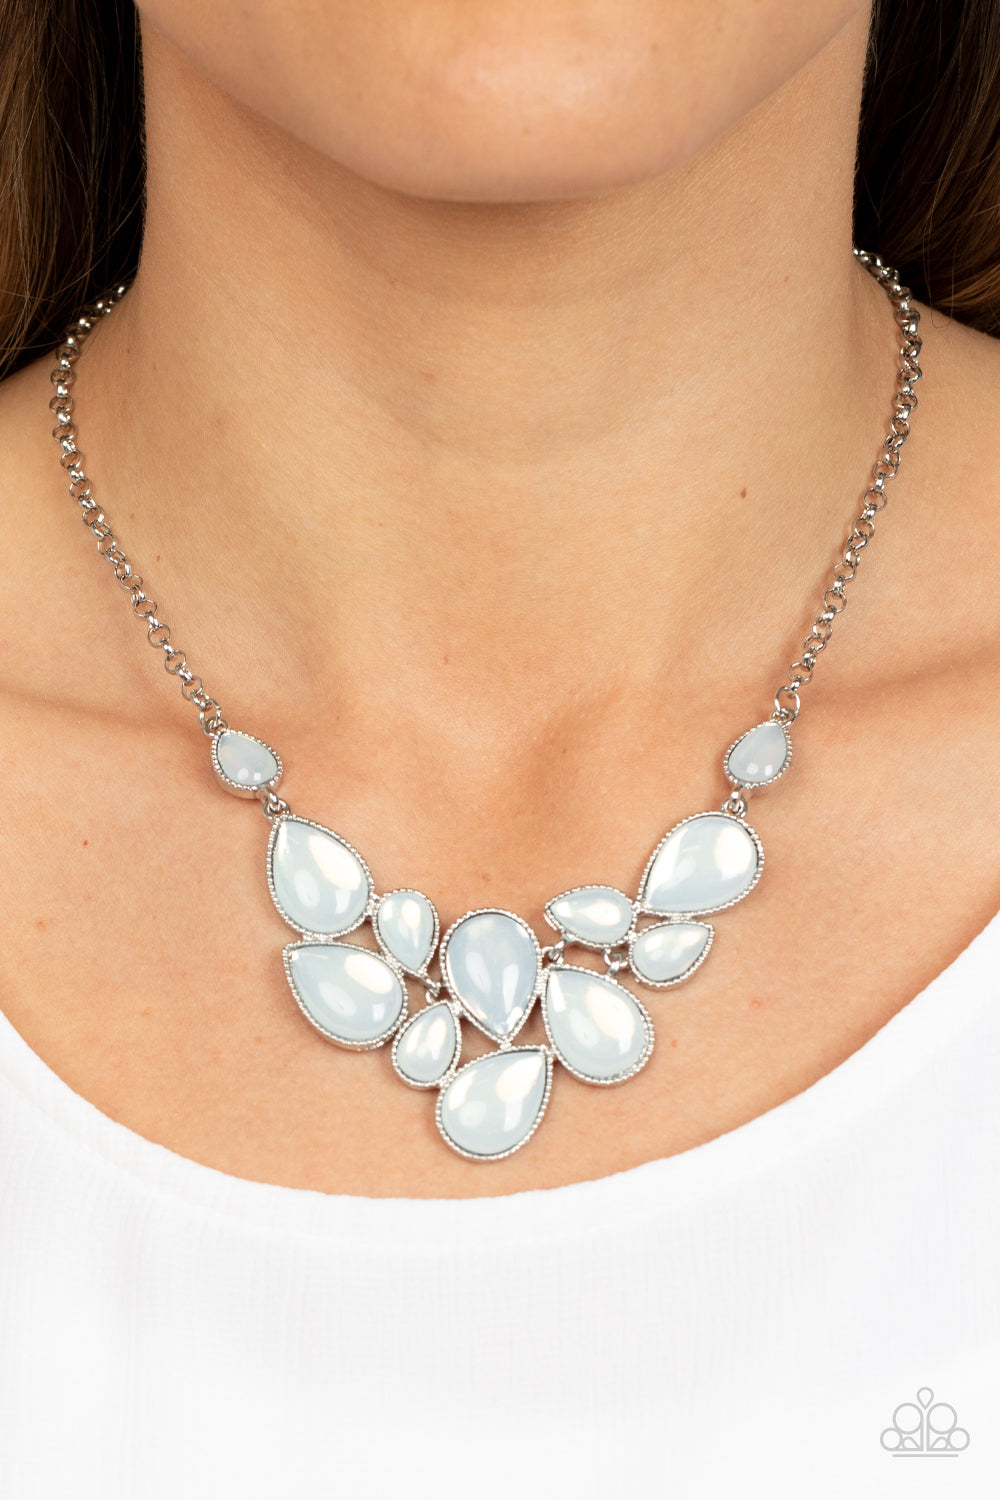 Keeps GLOWING and GLOWING - White Paparazzi Necklace